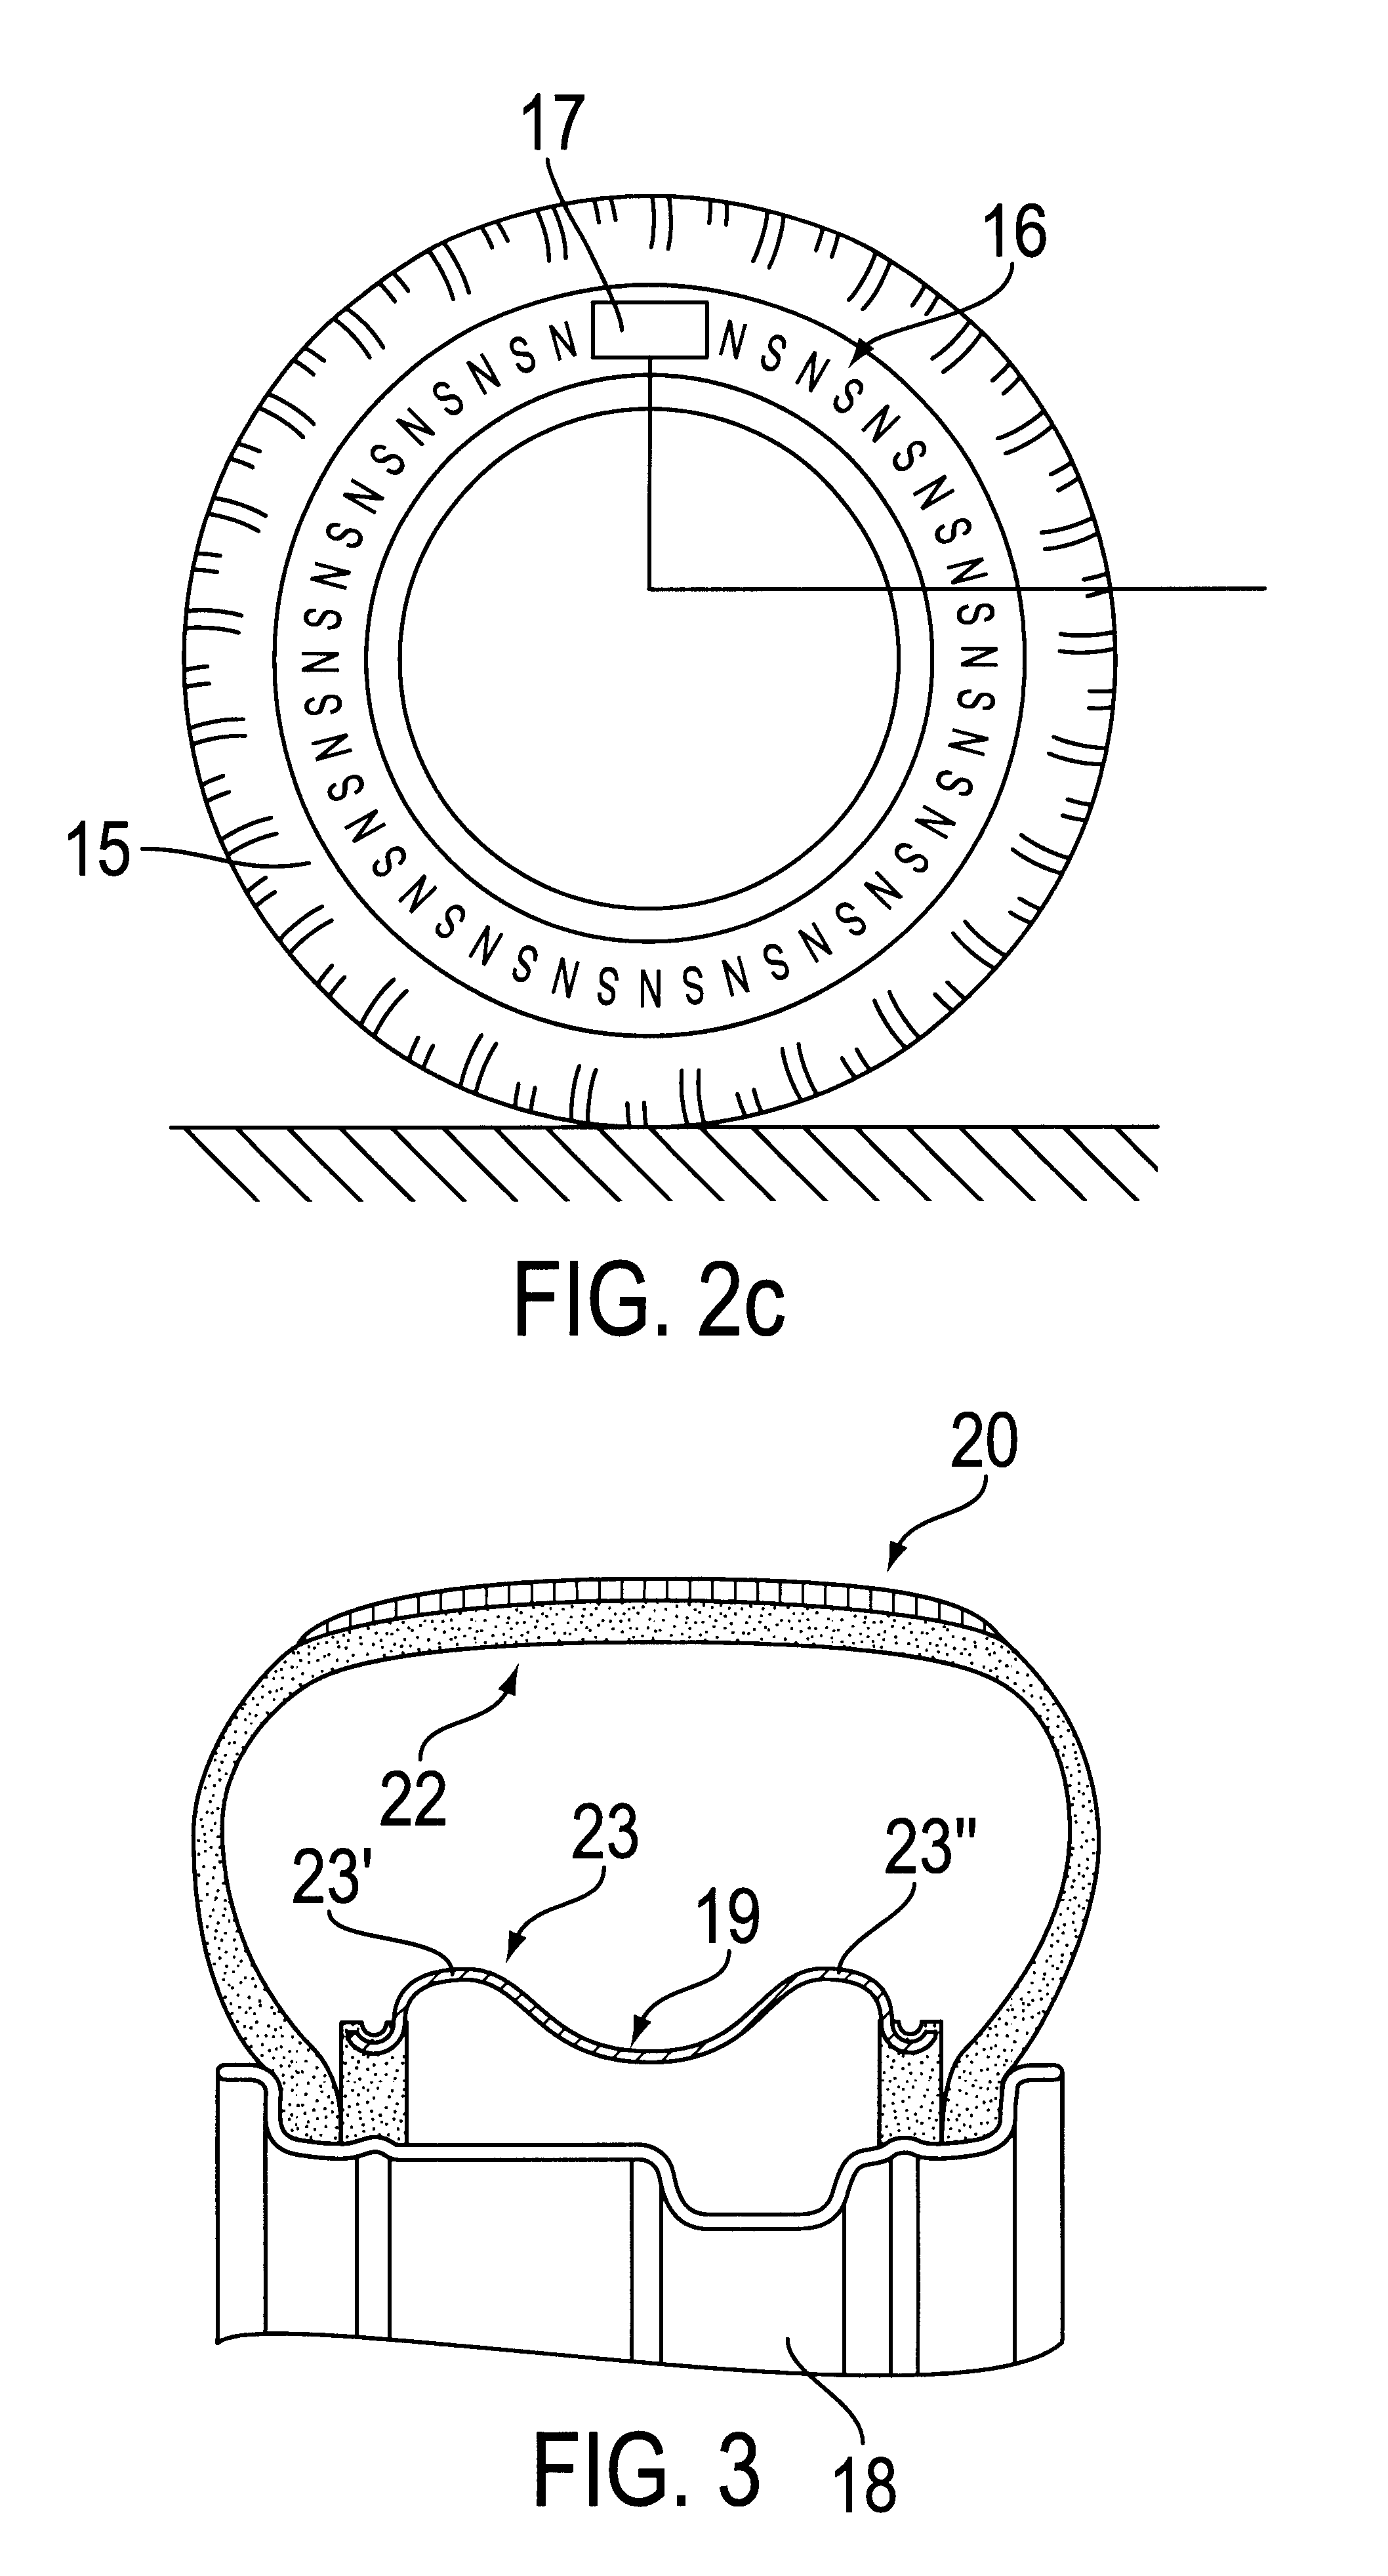 Method and system for ascertaining the emergency running condition of a pneumatic tire